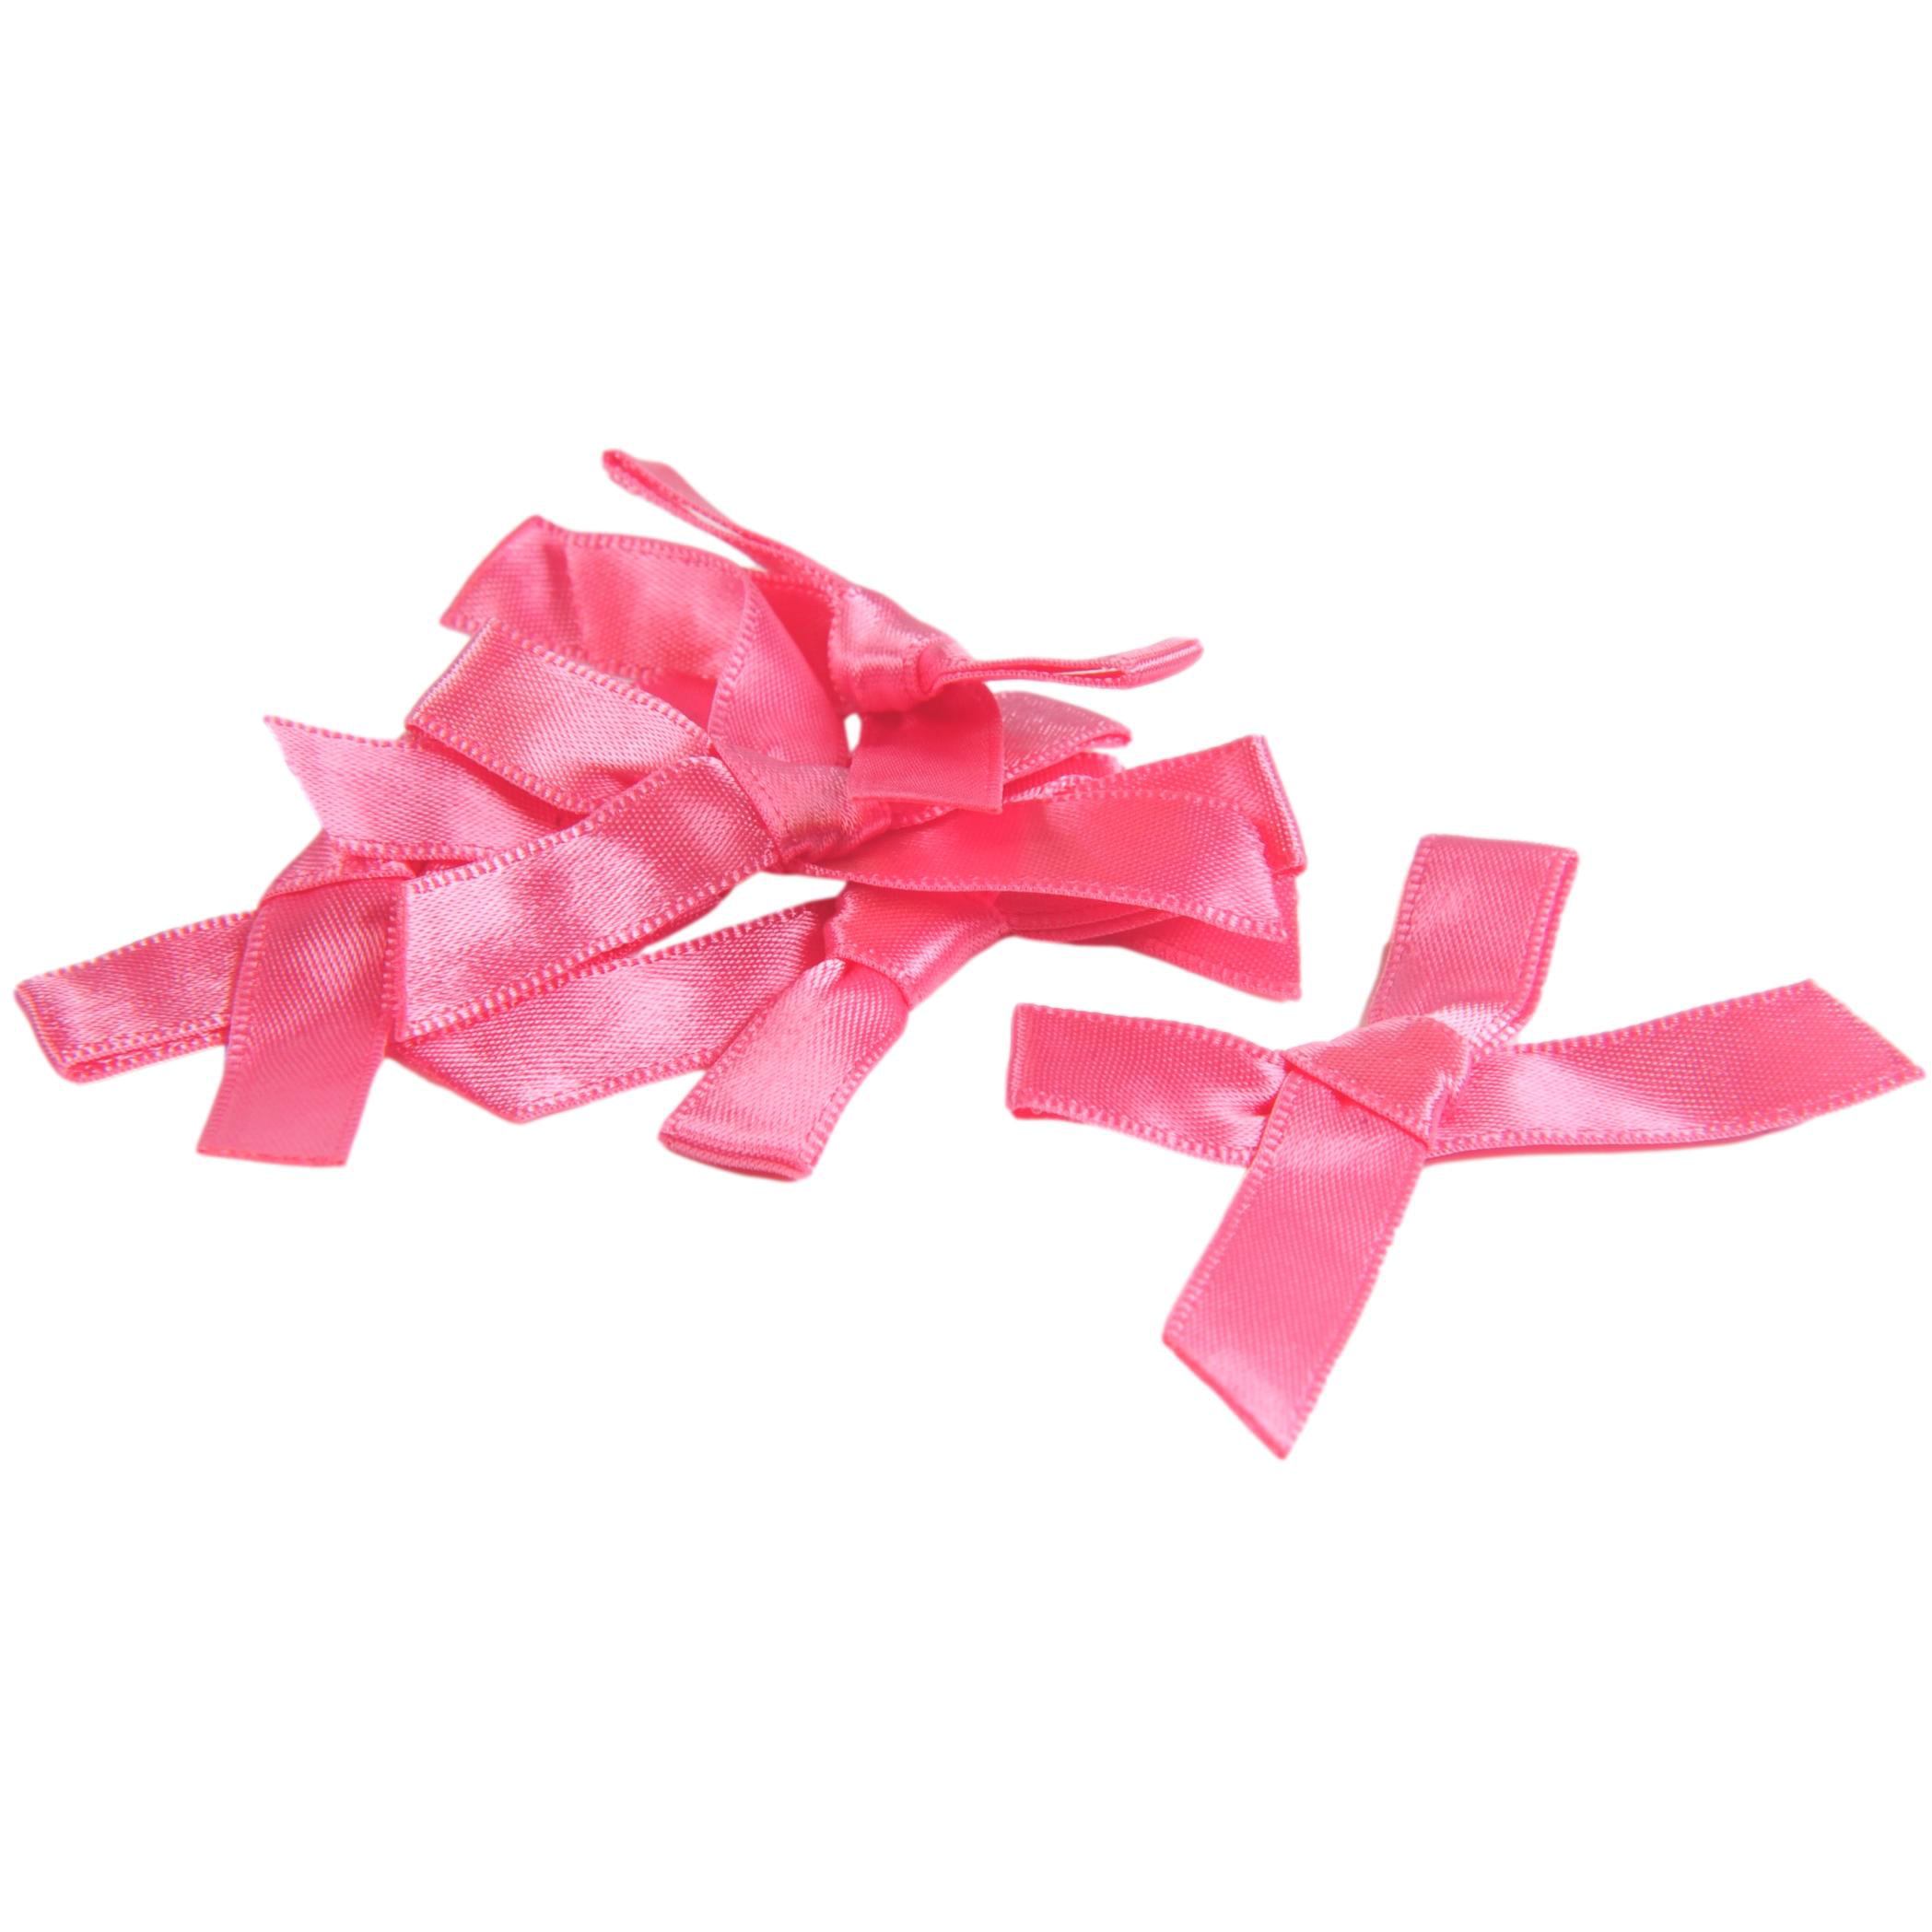 Christmas BOWS RIBBONS GIFTS CHRISTMAS WS1902 in 10er Set-Pink 